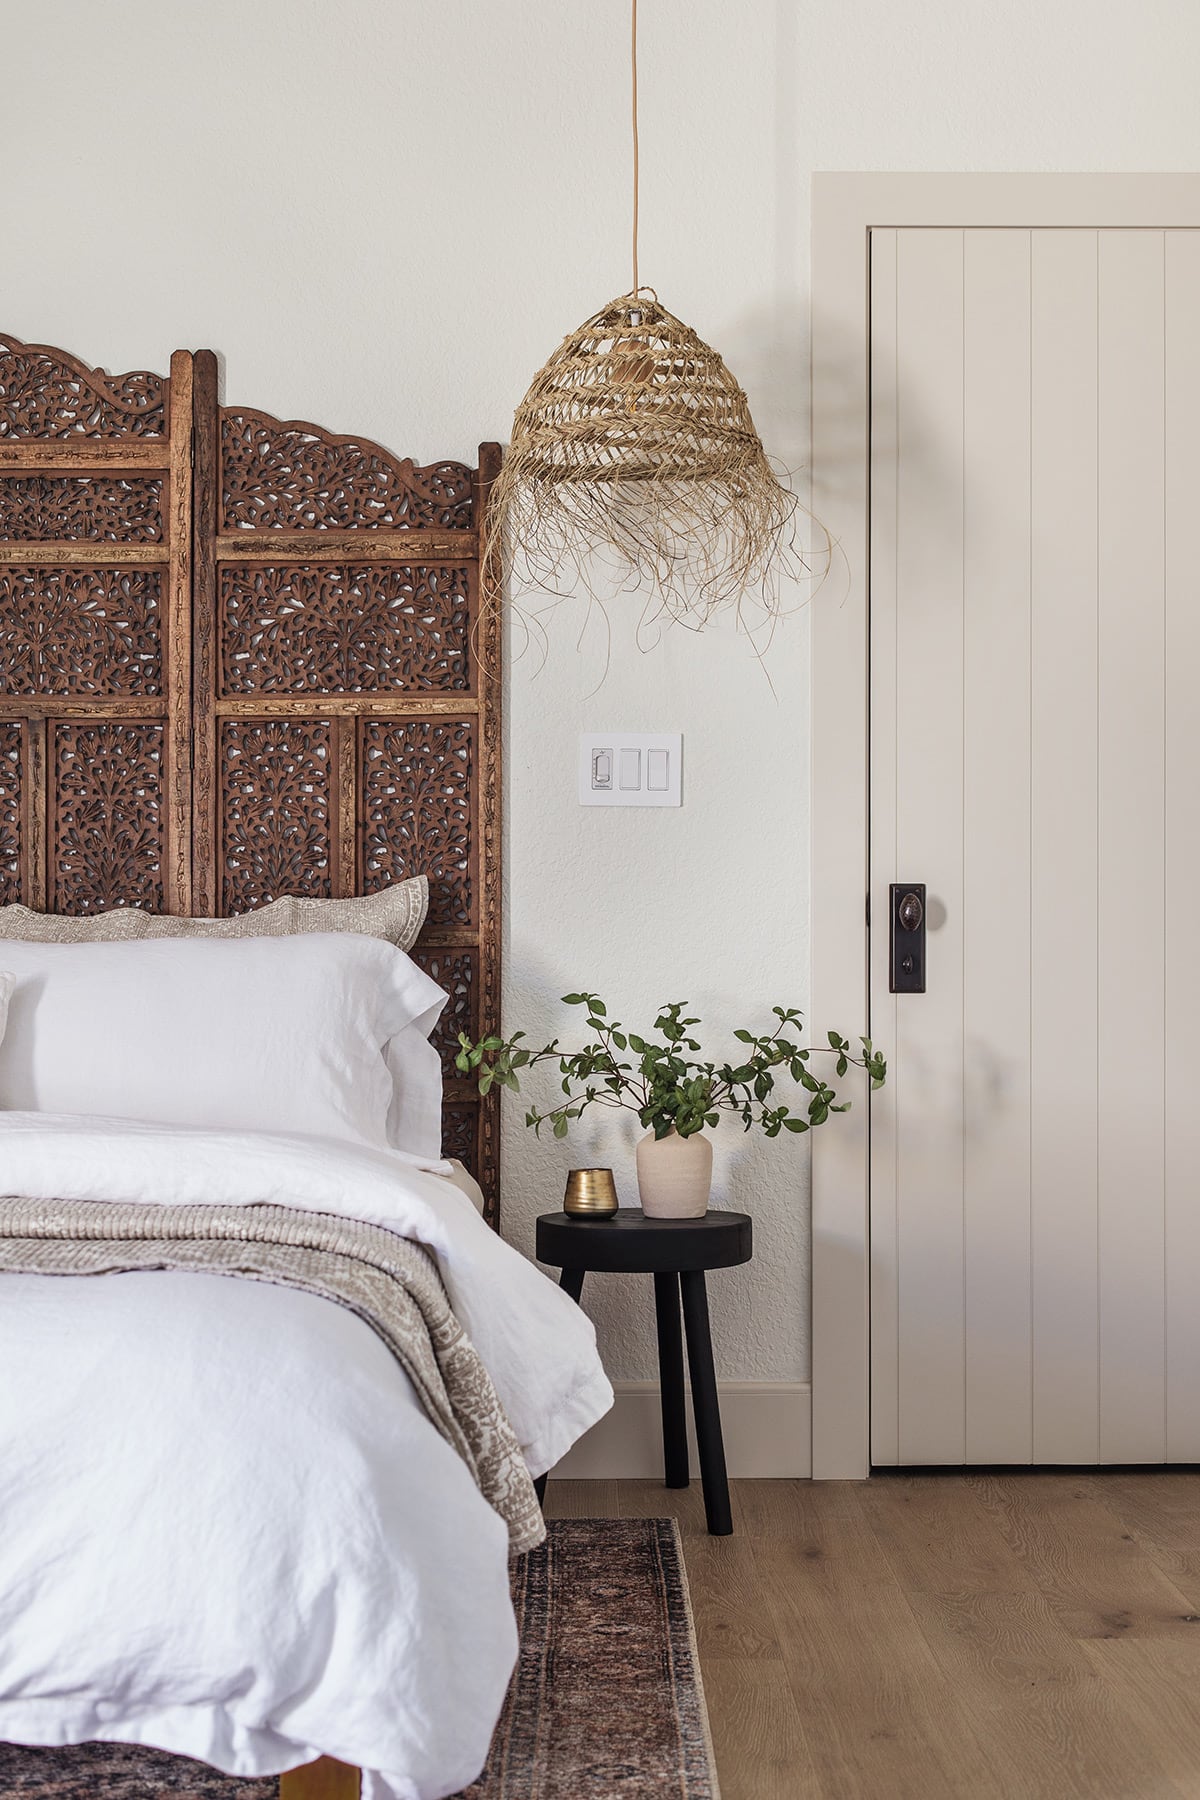 moroccan style bedroom with carved wood headboard and straw pendant lights, alabaster walls